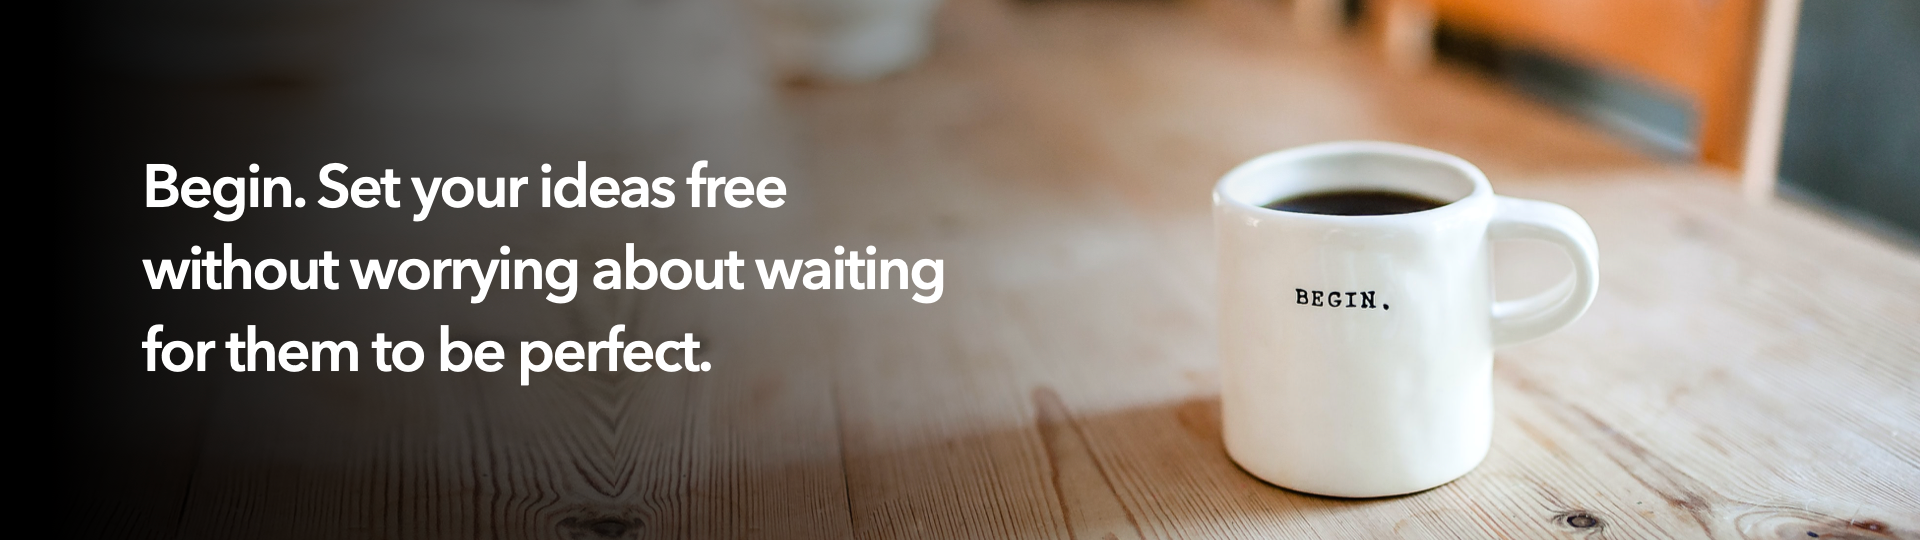 Begin. Set your ideas free without worrying about waiting for them to be perfect.